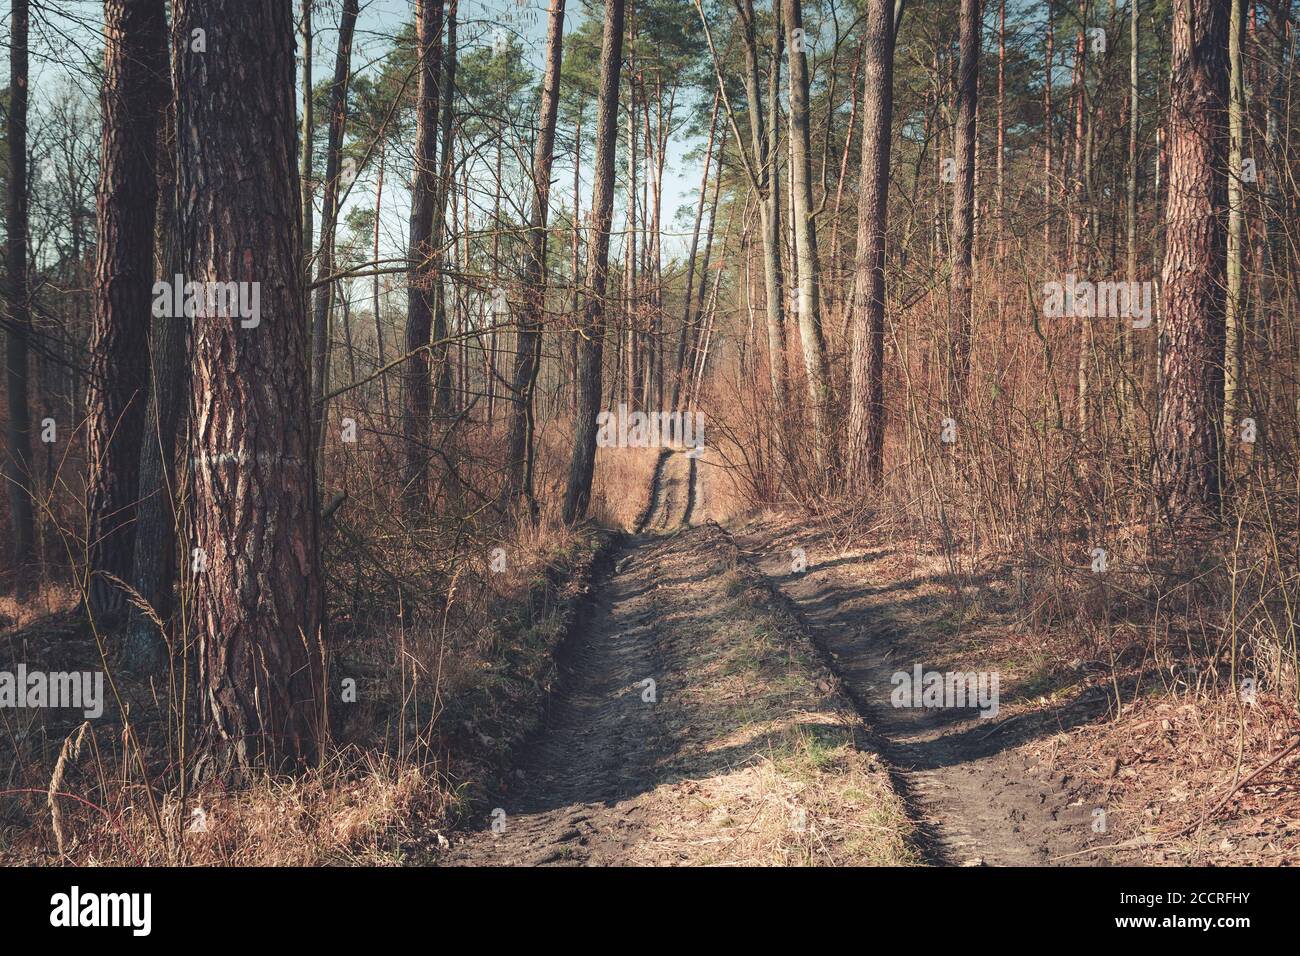 A hilly road through a brown forest Stock Photo